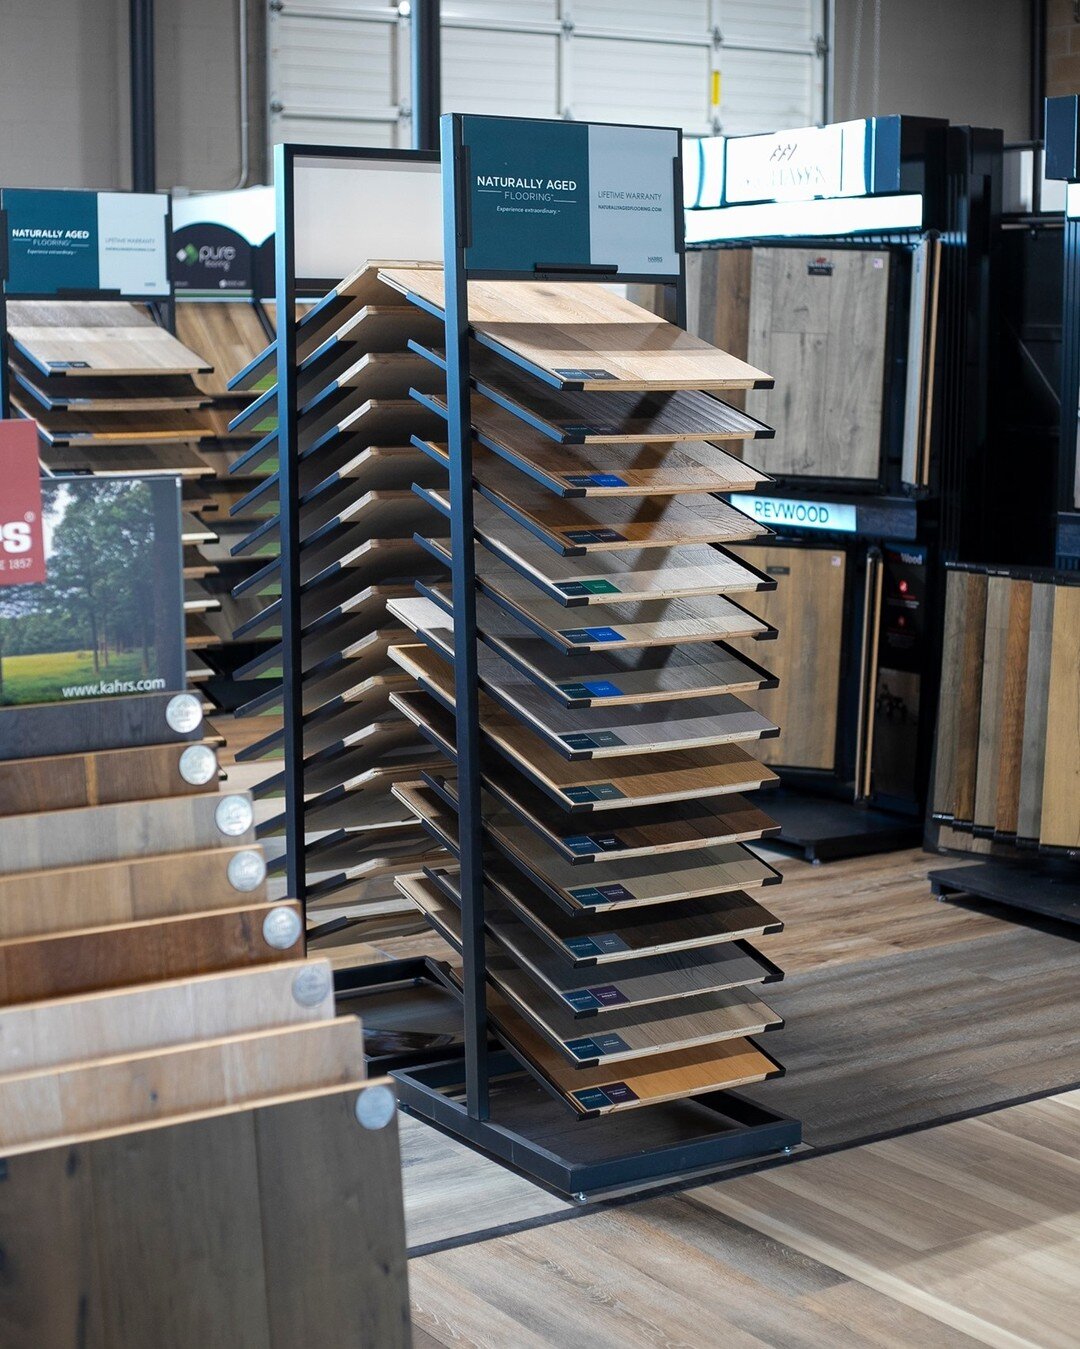 Our selection of new flooring seems to grow by the day. We welcome you all to come by and browse the showroom floor, pressure free!

Phone: (541) 973-2710
Email: Office@RogueFlooring.com
Store hours: M - F, 8am to 5pm &amp; Sat, 9am to 4pm

#RogueFlo